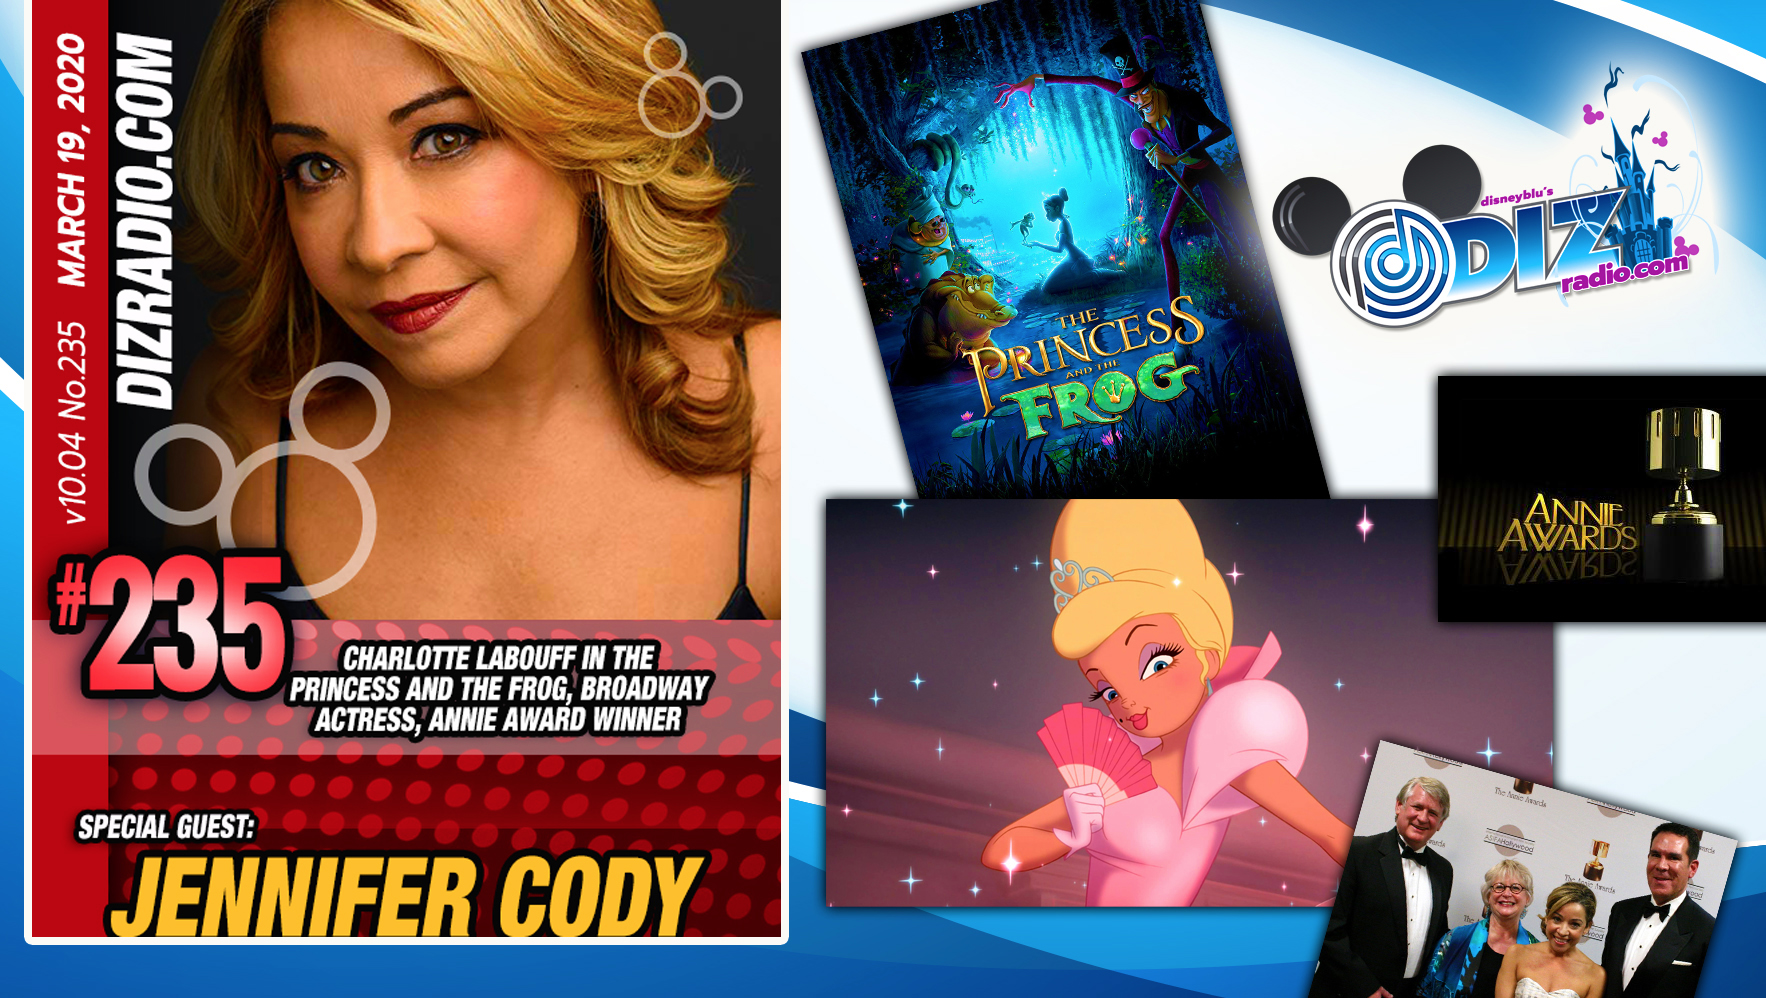 DisneyBlu's DizRadio Disney on Demand Podcast Show #235 w/ Special Guest JENNIFER CODY (Charlotte in Princess and the Frog, Broadway Actress, Annie Award Winner)